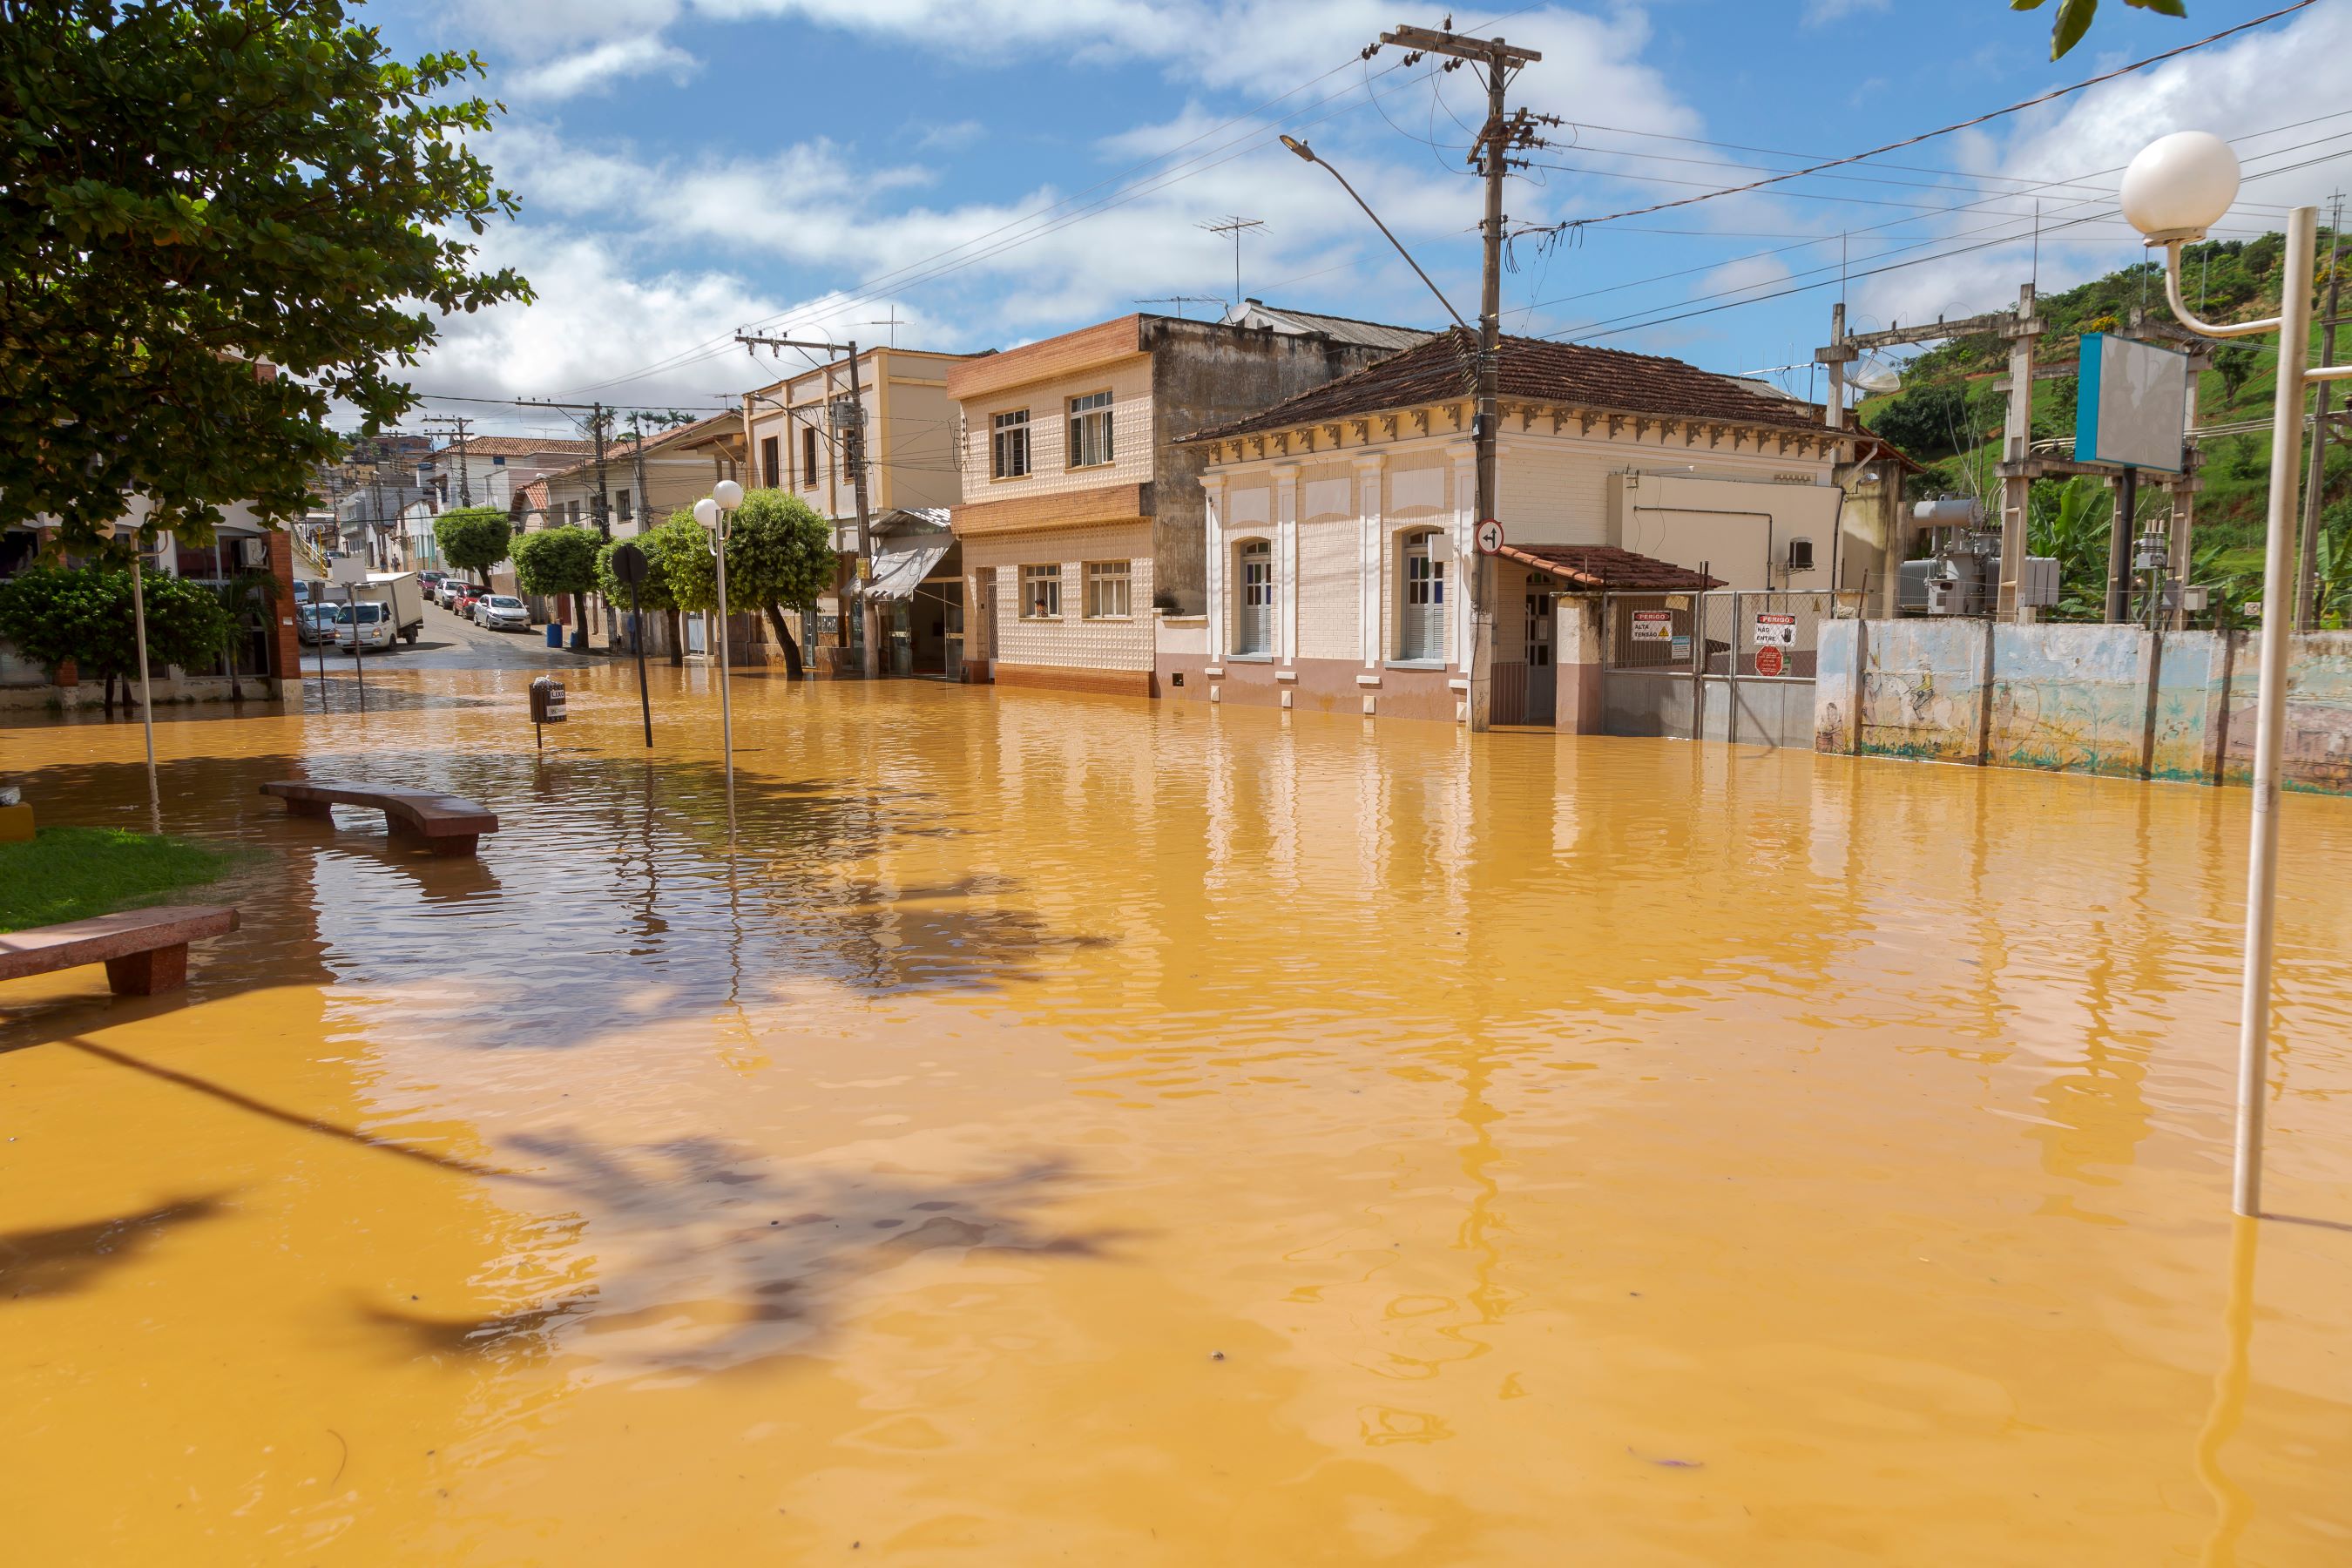 Decorative image of a flooded street in Brazil